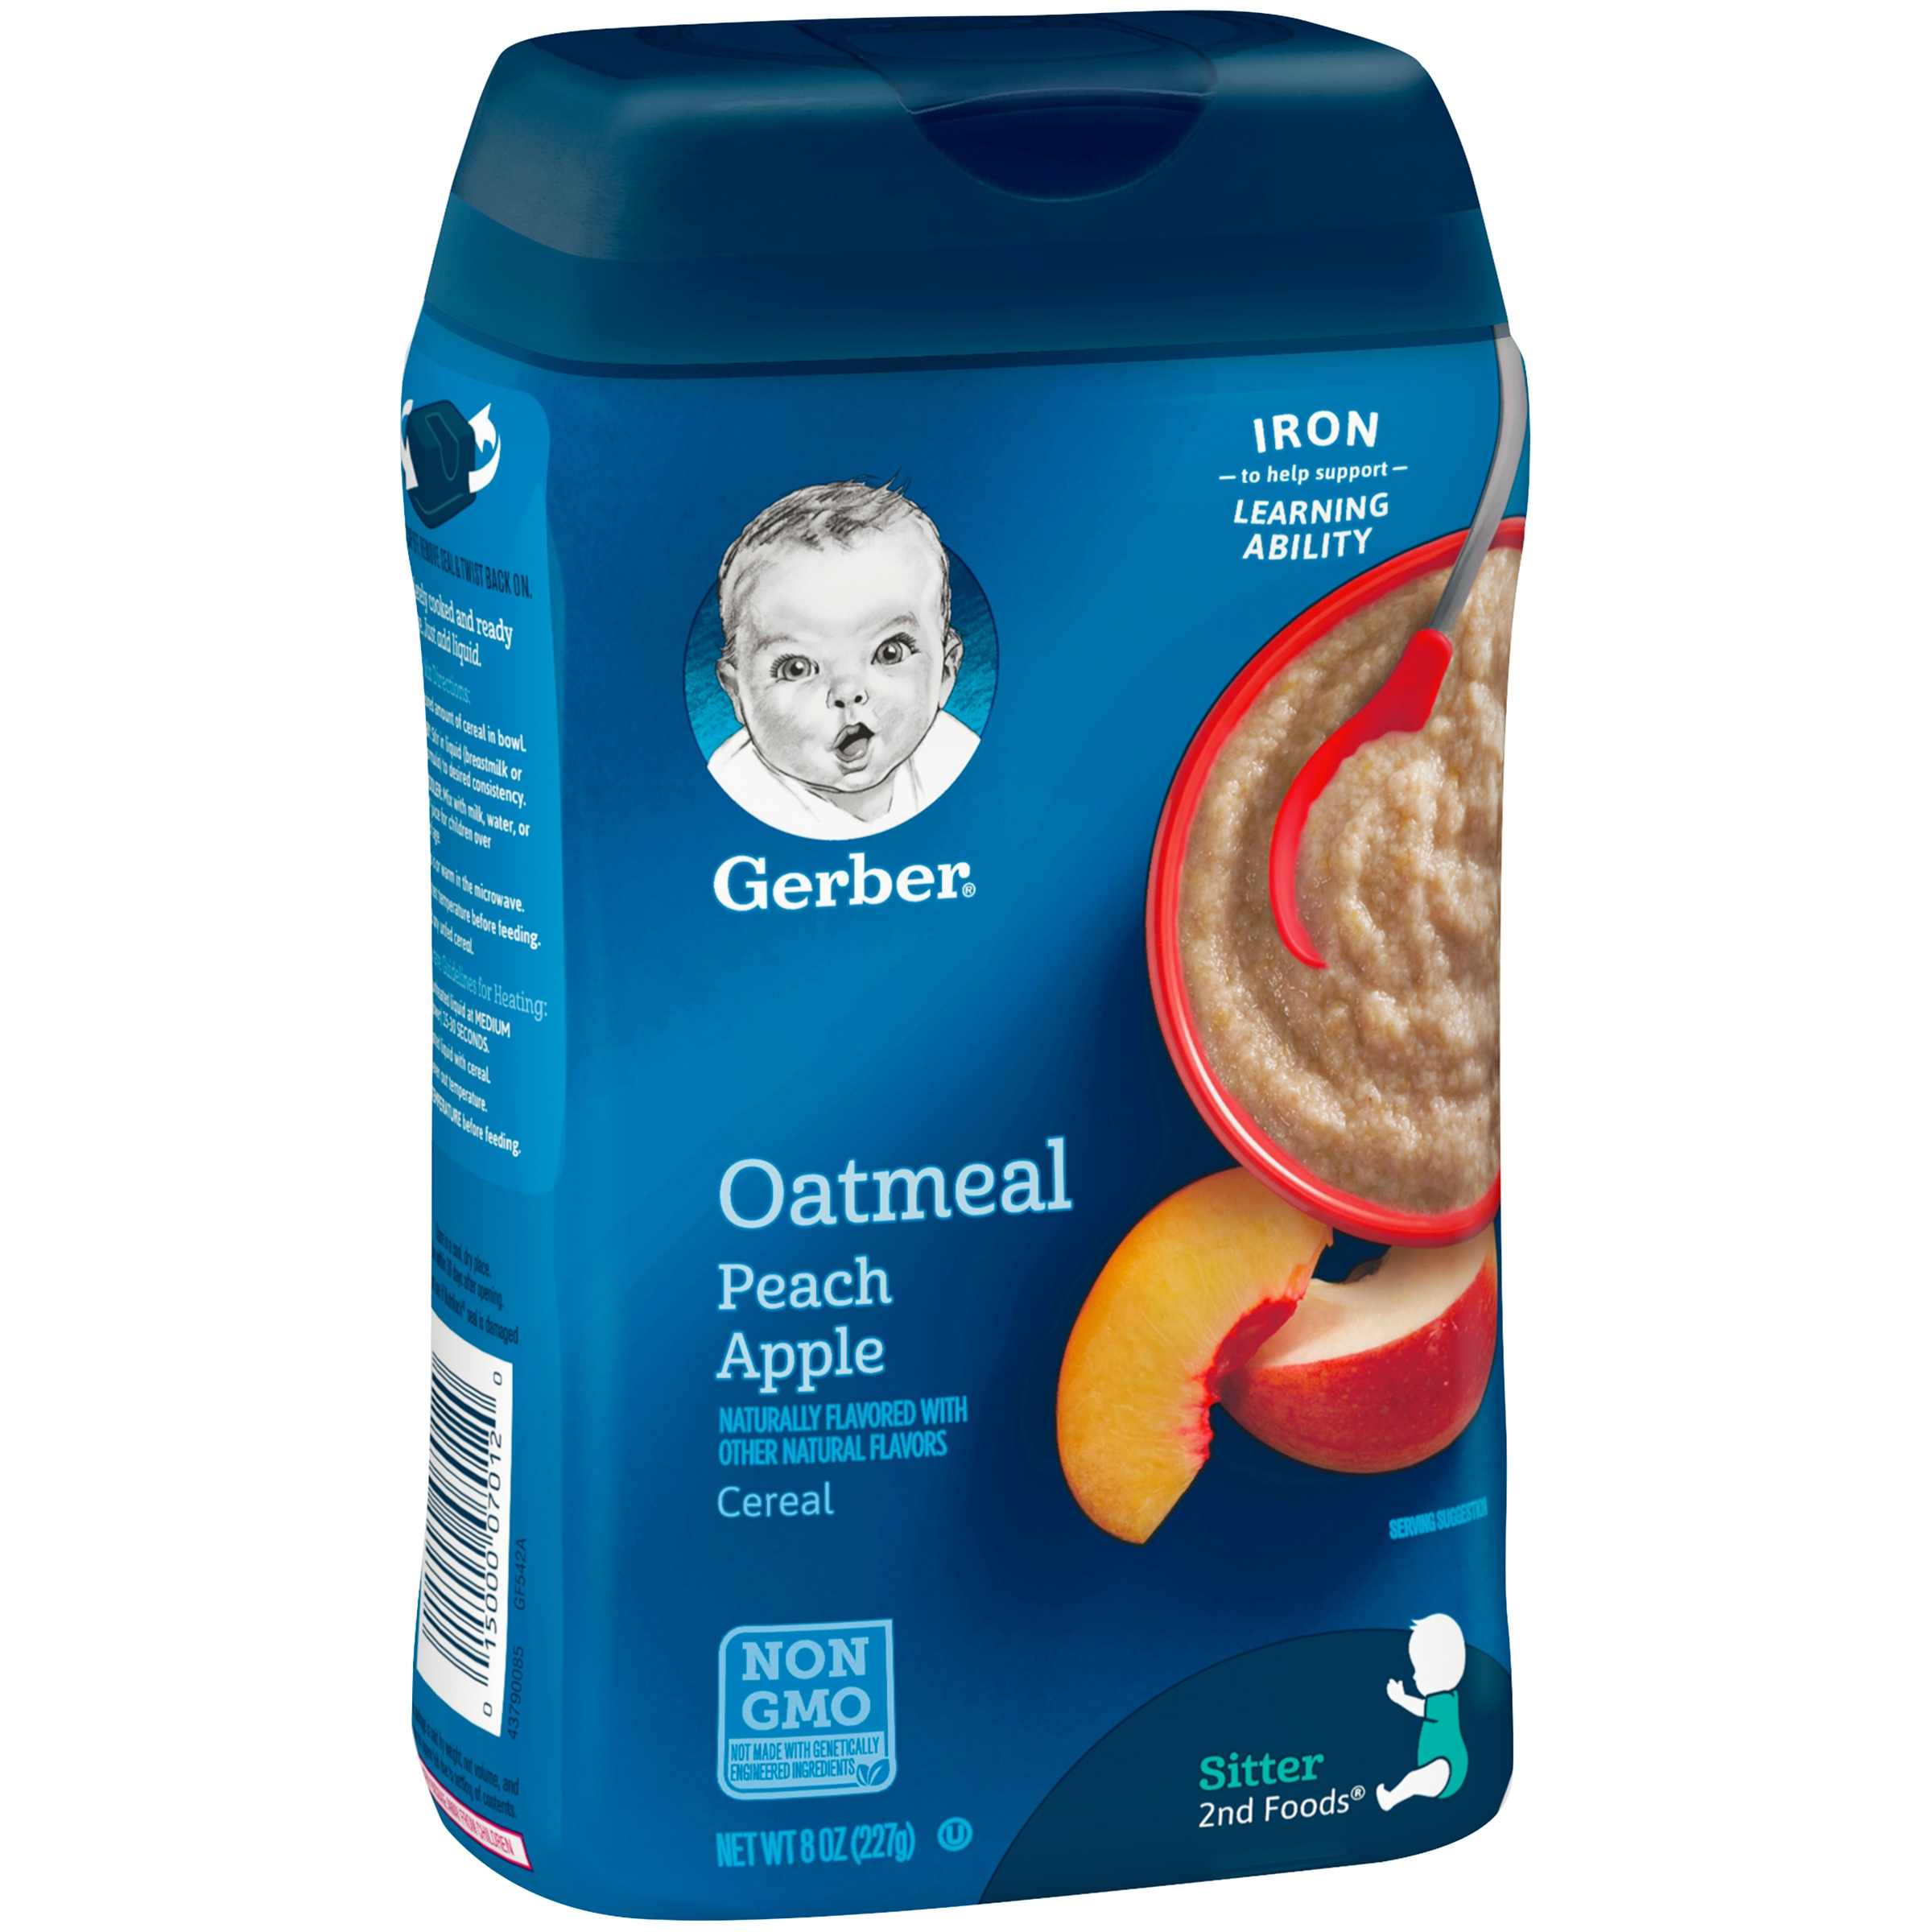 GERBER Oatmeal and Peach Apple Baby Cereal 8 oz - image 5 of 8